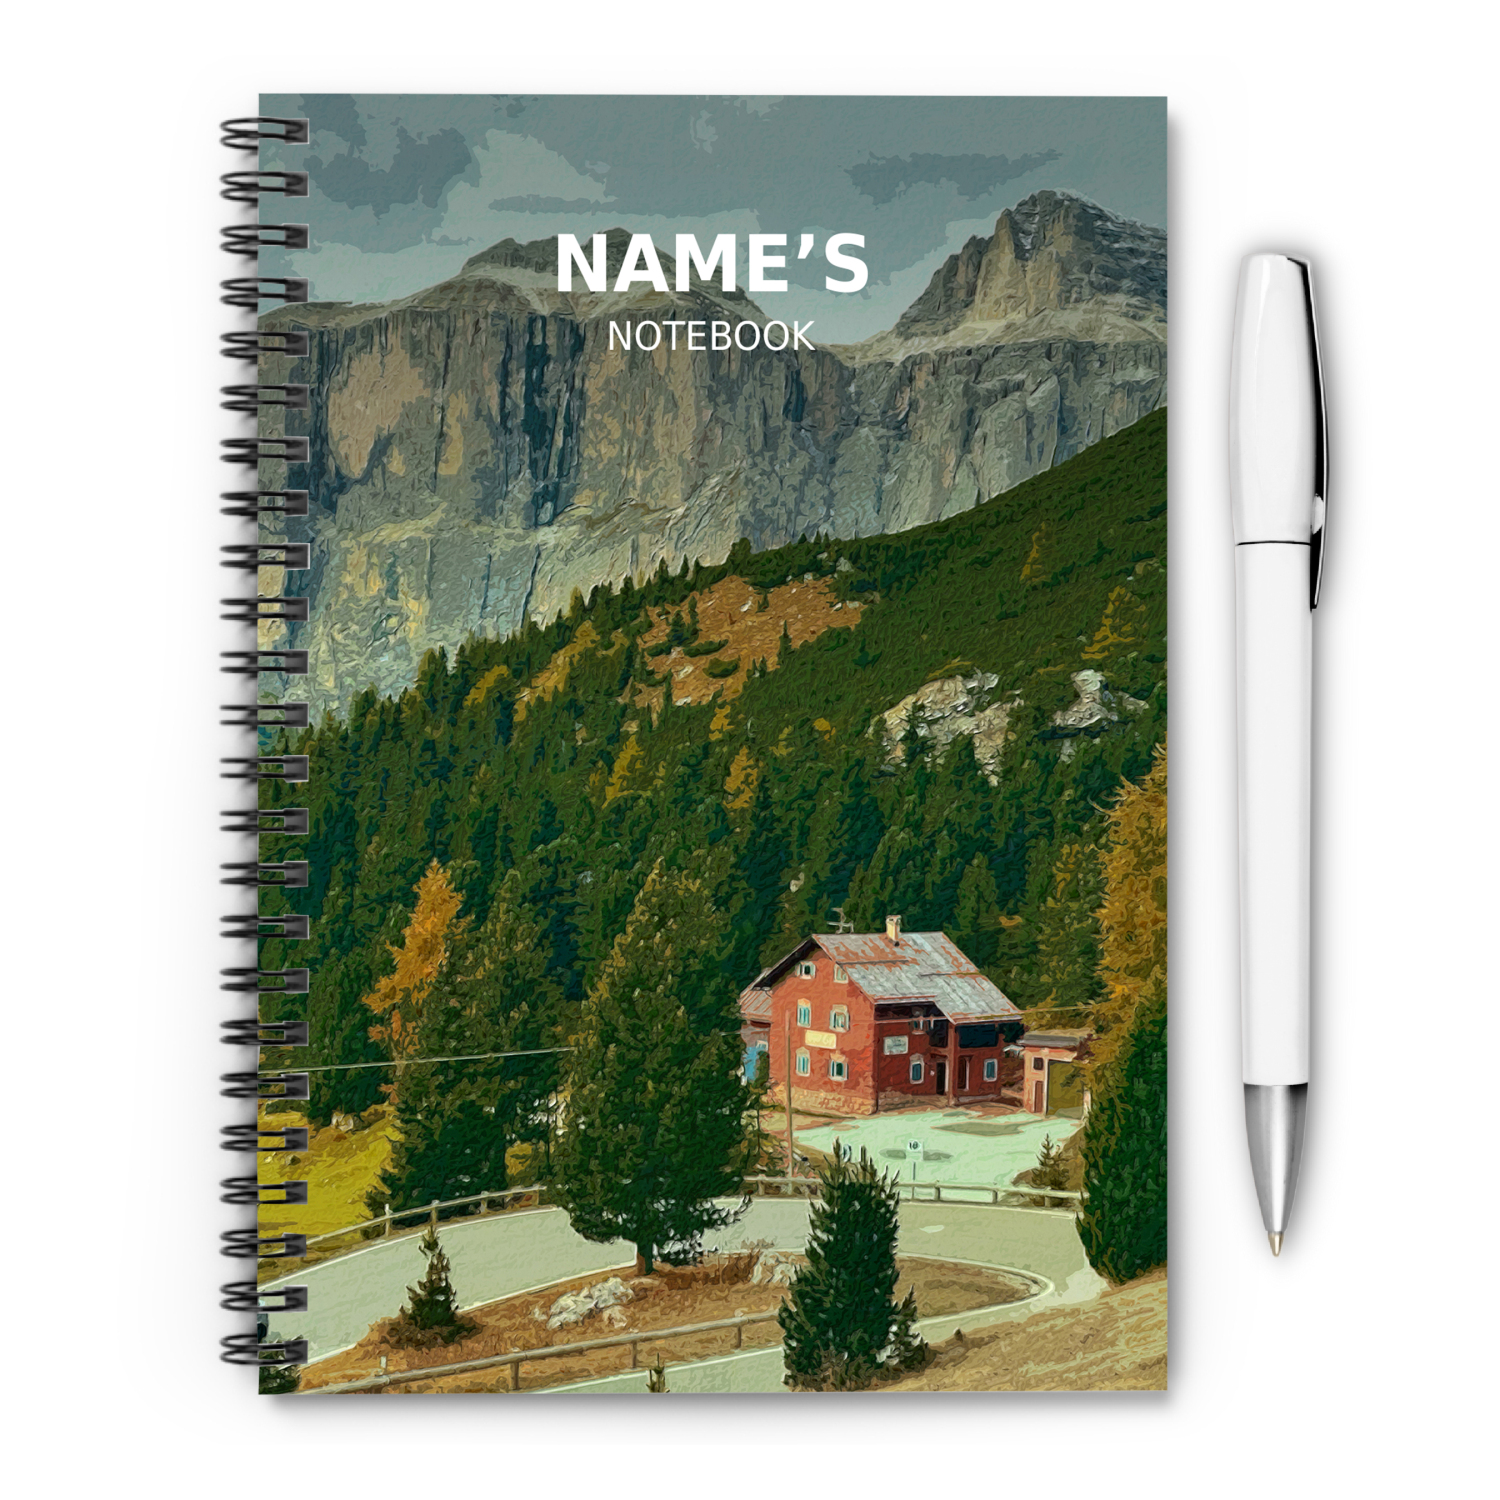 Canazei - Italy - A5 Notebook - Single Note Book